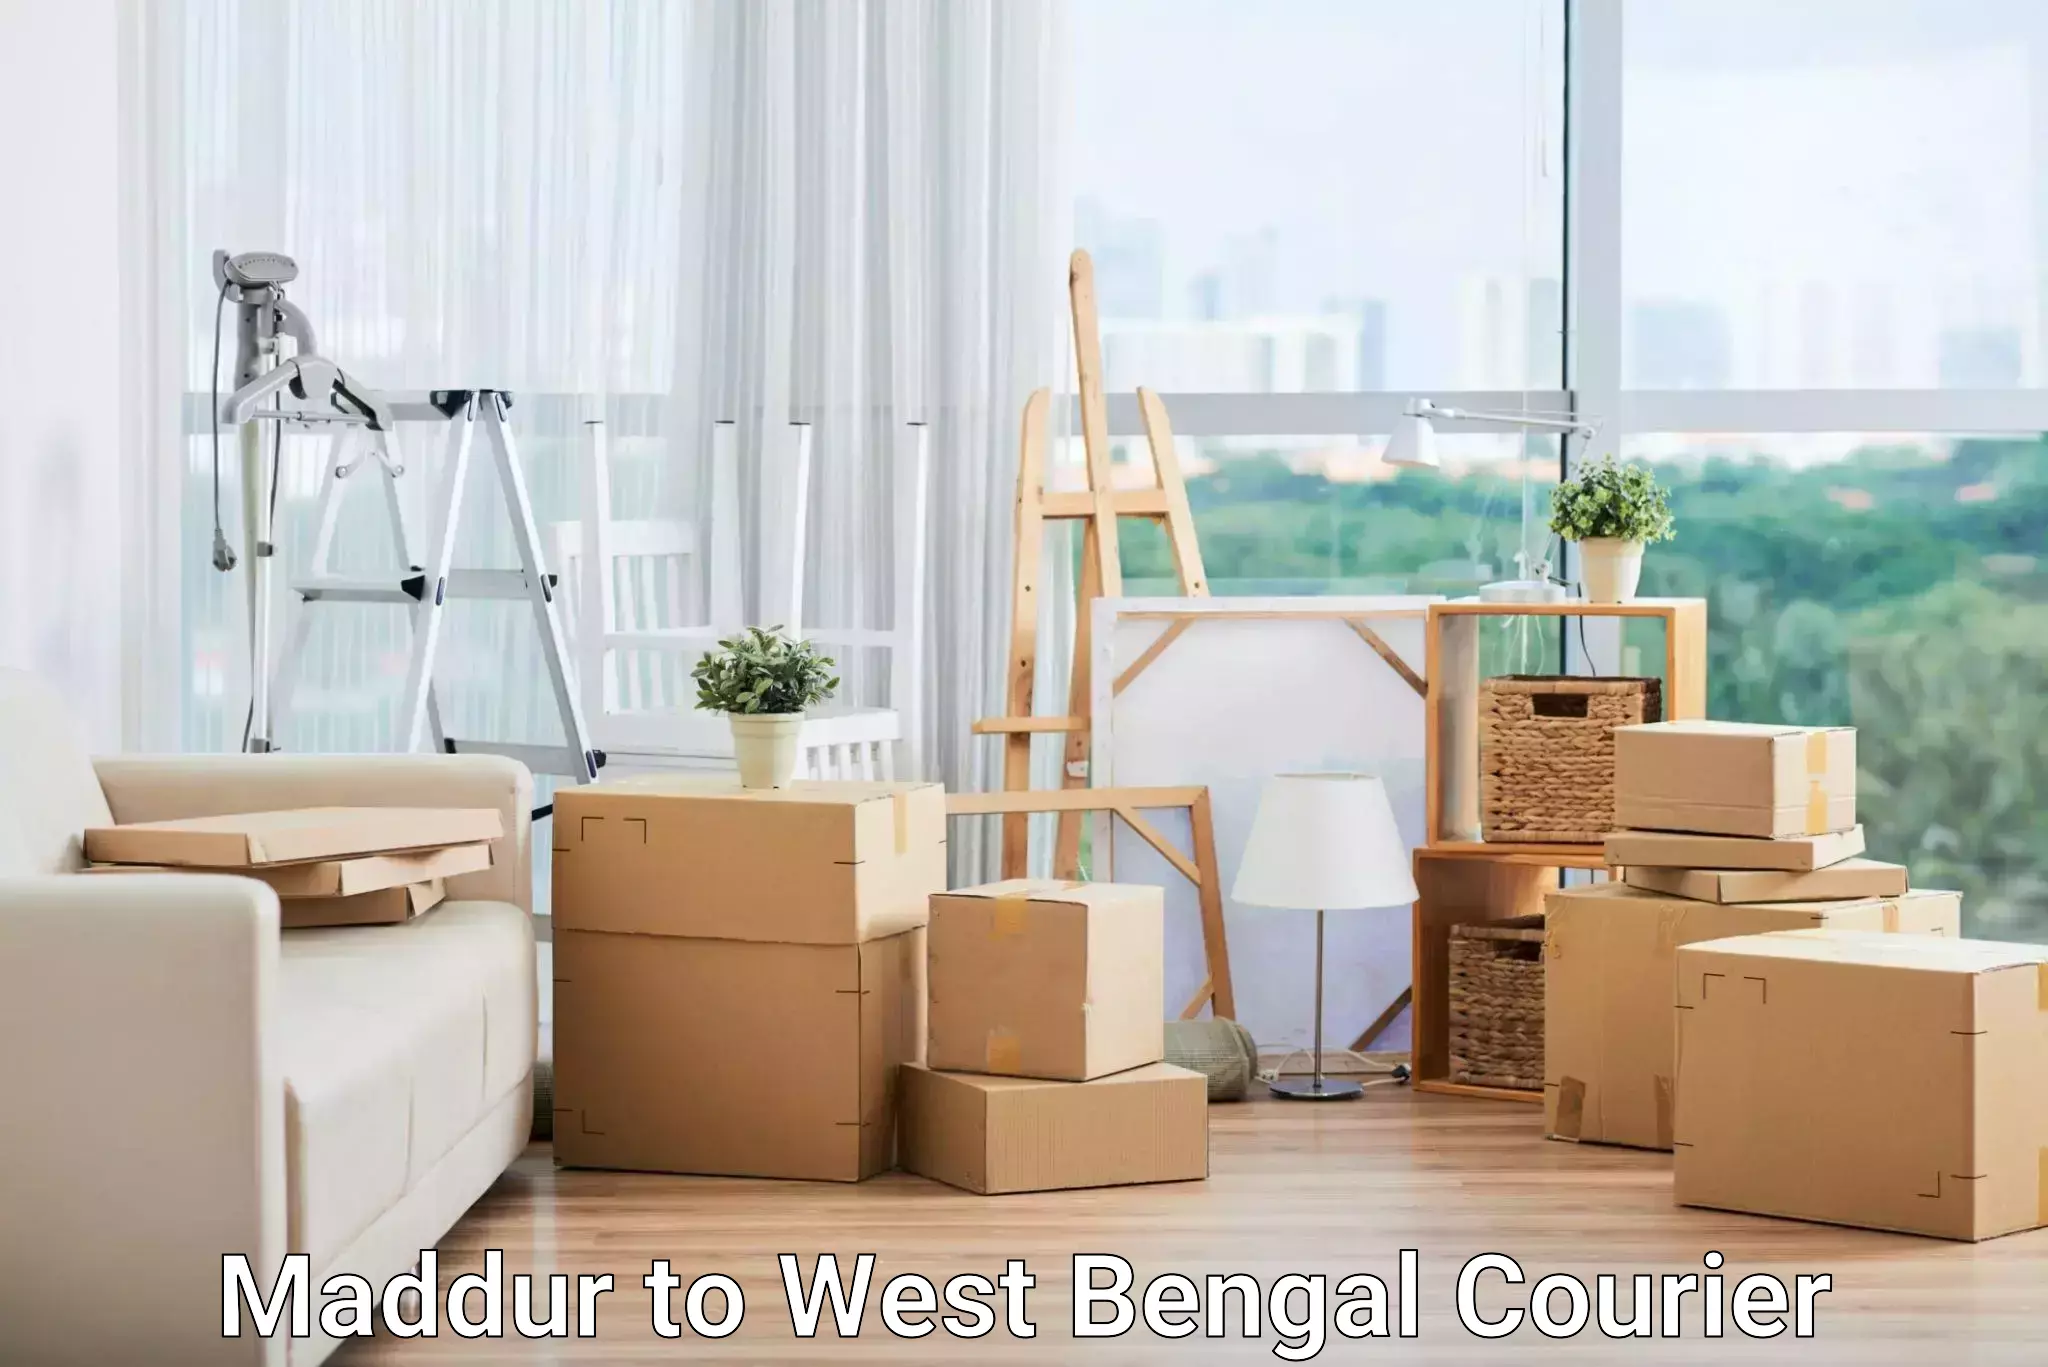 International courier networks in Maddur to West Bengal